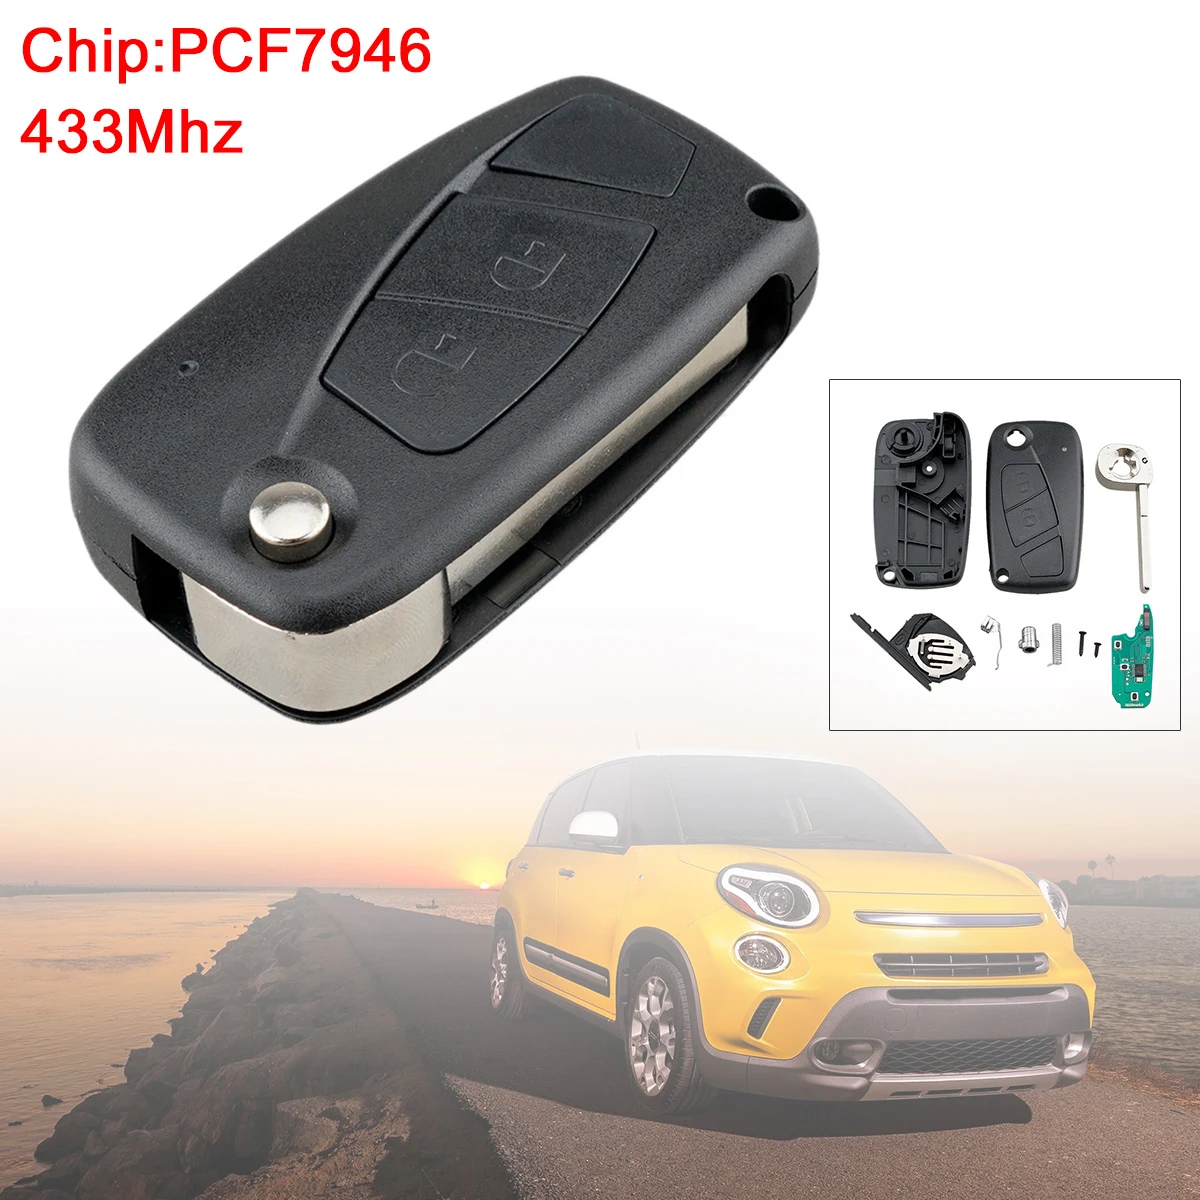 433Mhz 2 Buttons Flip Remote Car Key Fob with PCF7946 Chip Black Keyless Entry Transmitter for Fiat 500 Panda Bravo Punto Ducato 433mhz 2 buttons flip car remote key keyless entry with id63 80bit chip 41781 fit for mazda 3 bt 50